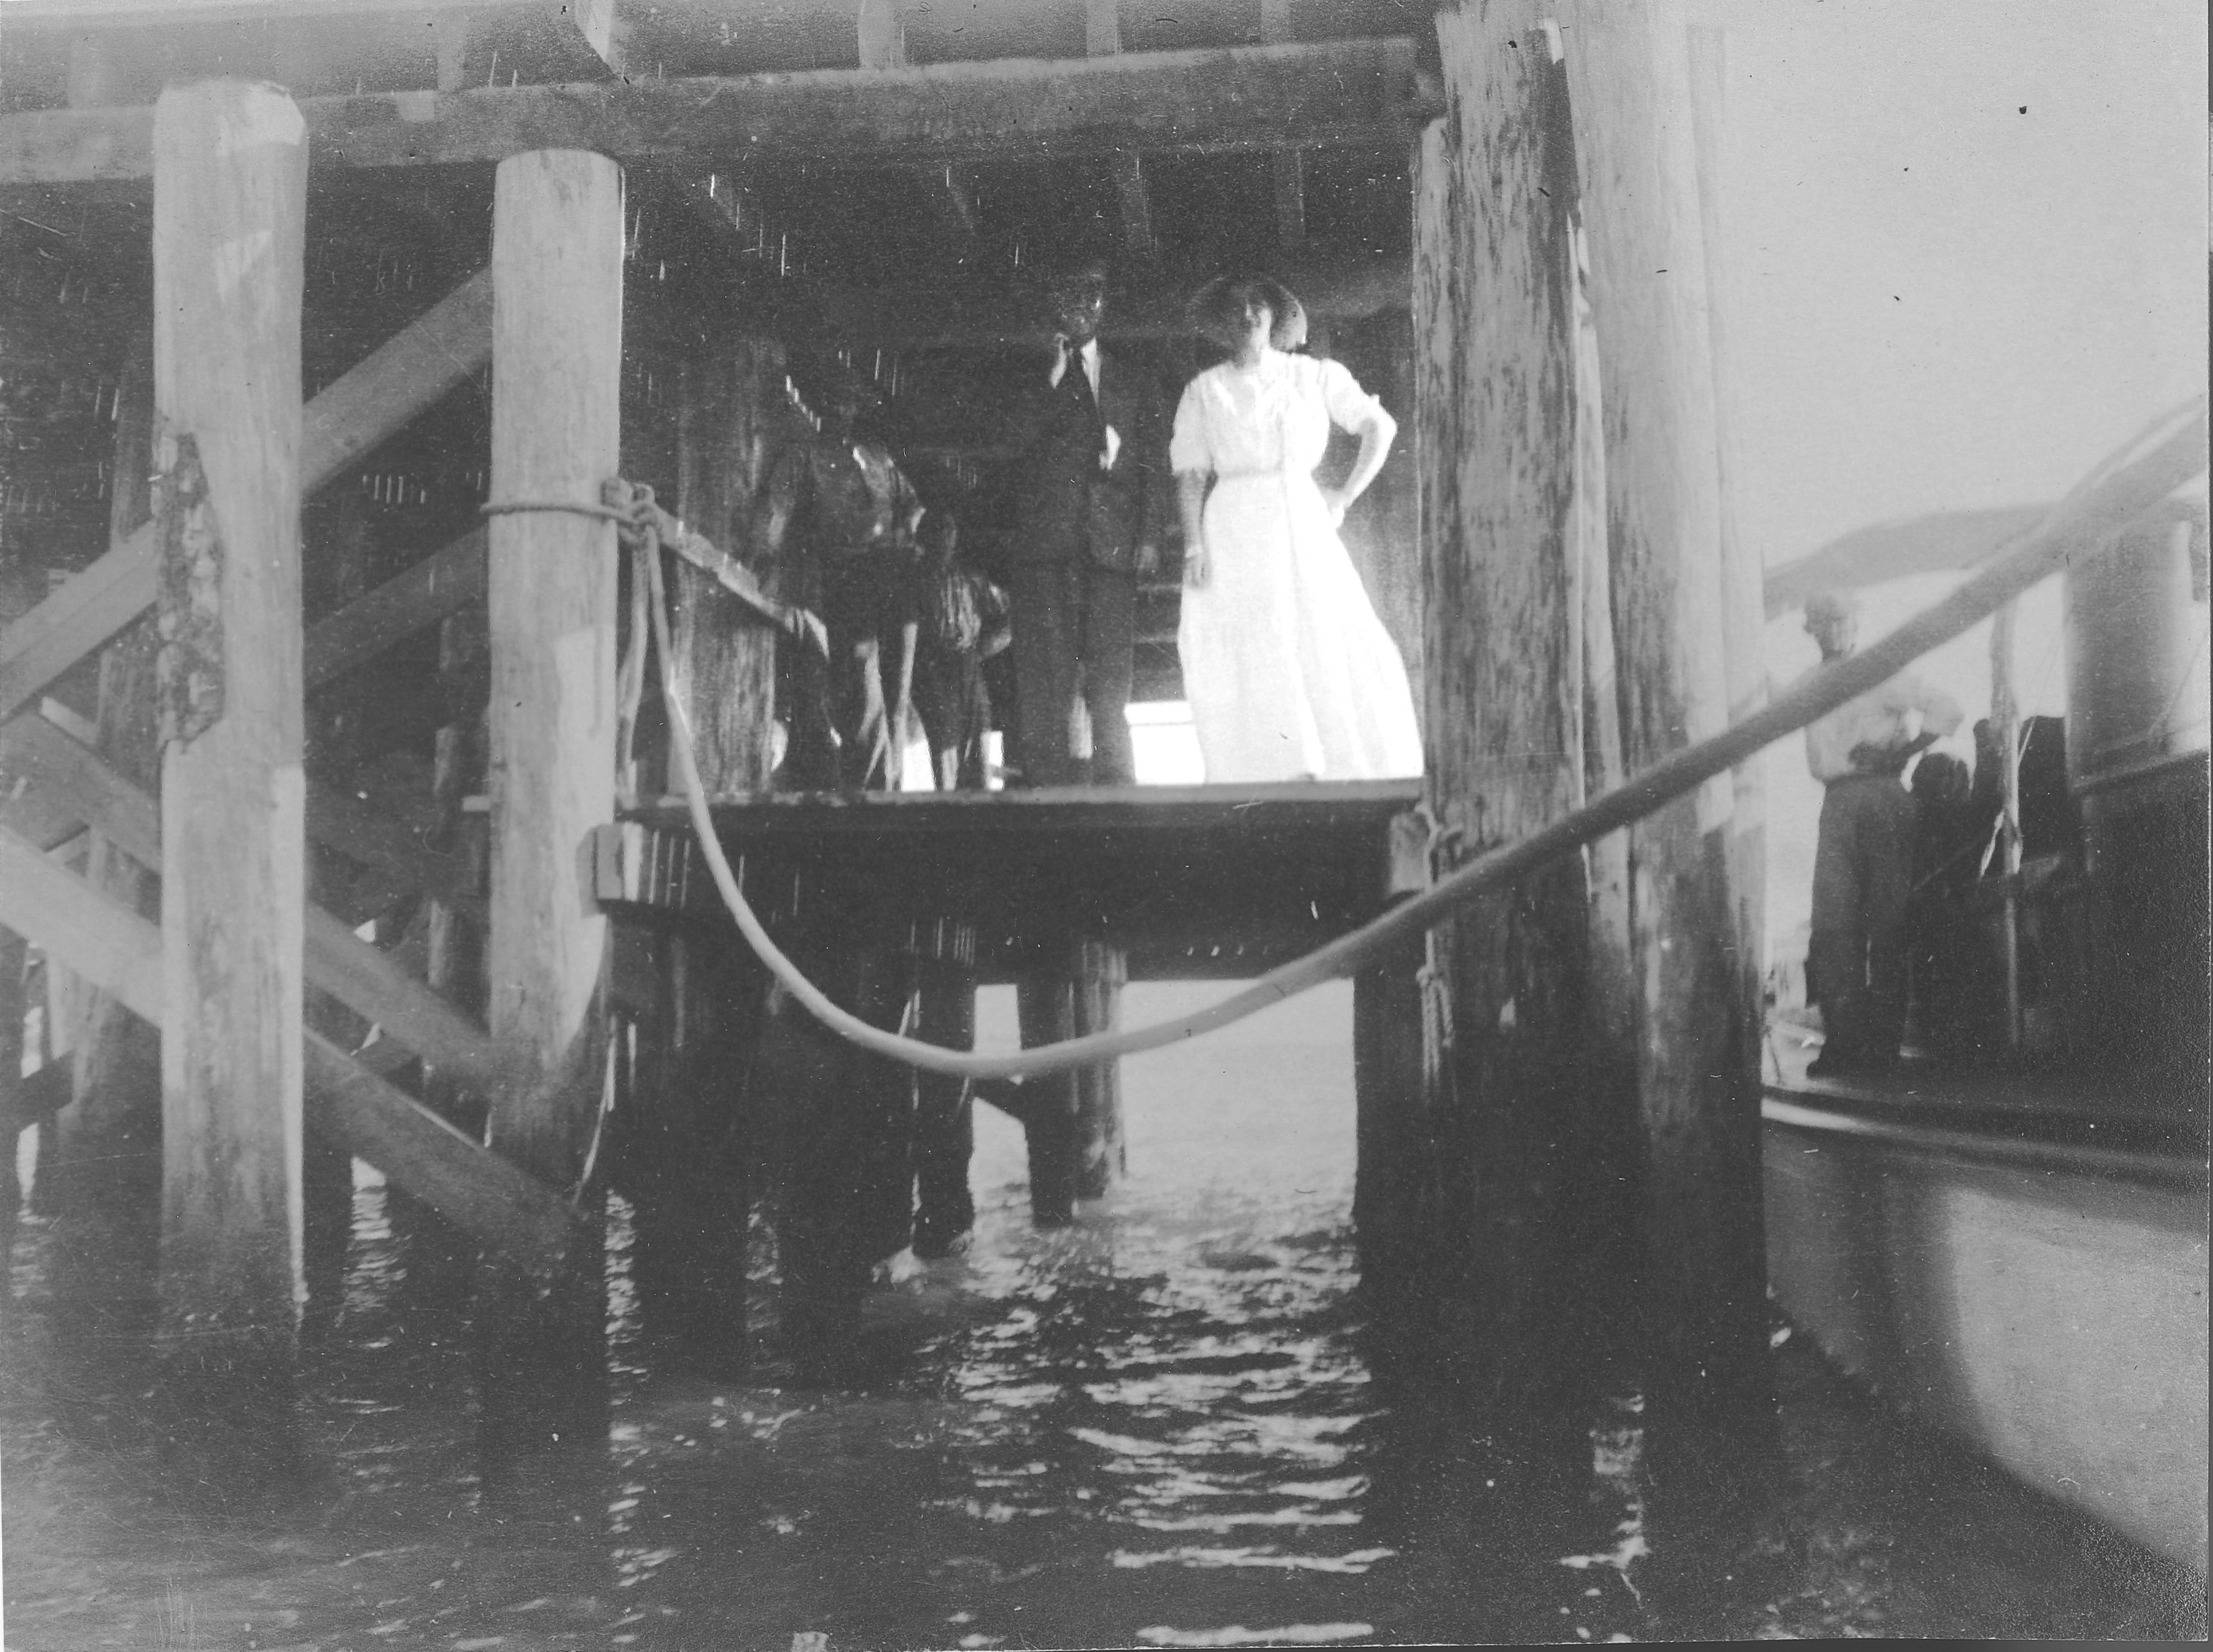 The Old Naples: The Storied Past of the Naples Pier - The New Naples